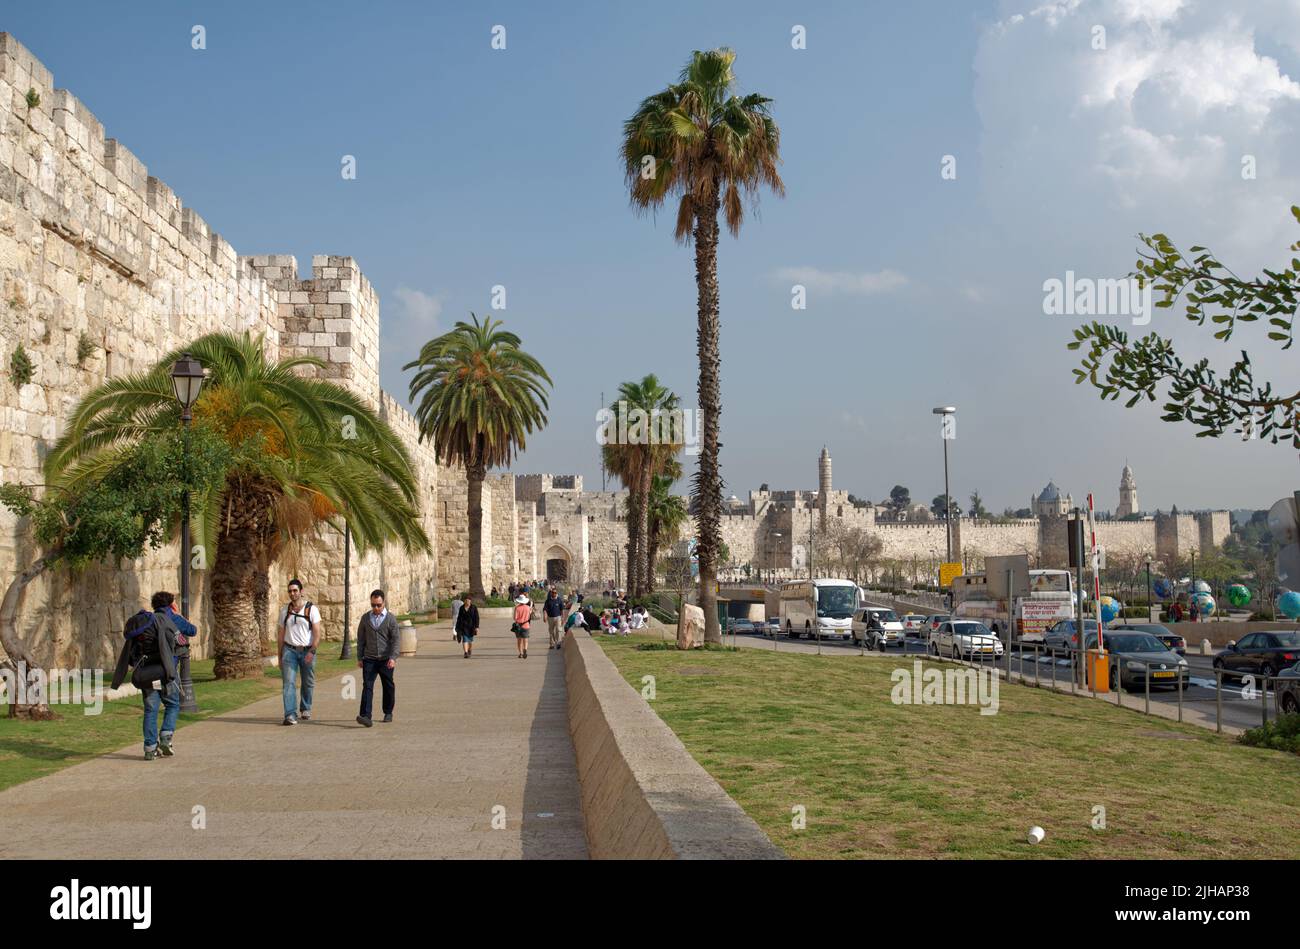 People at the walls of Old City of Jerusalem, Israel. Old City is listed as UNESCO World Heritage site Stock Photo